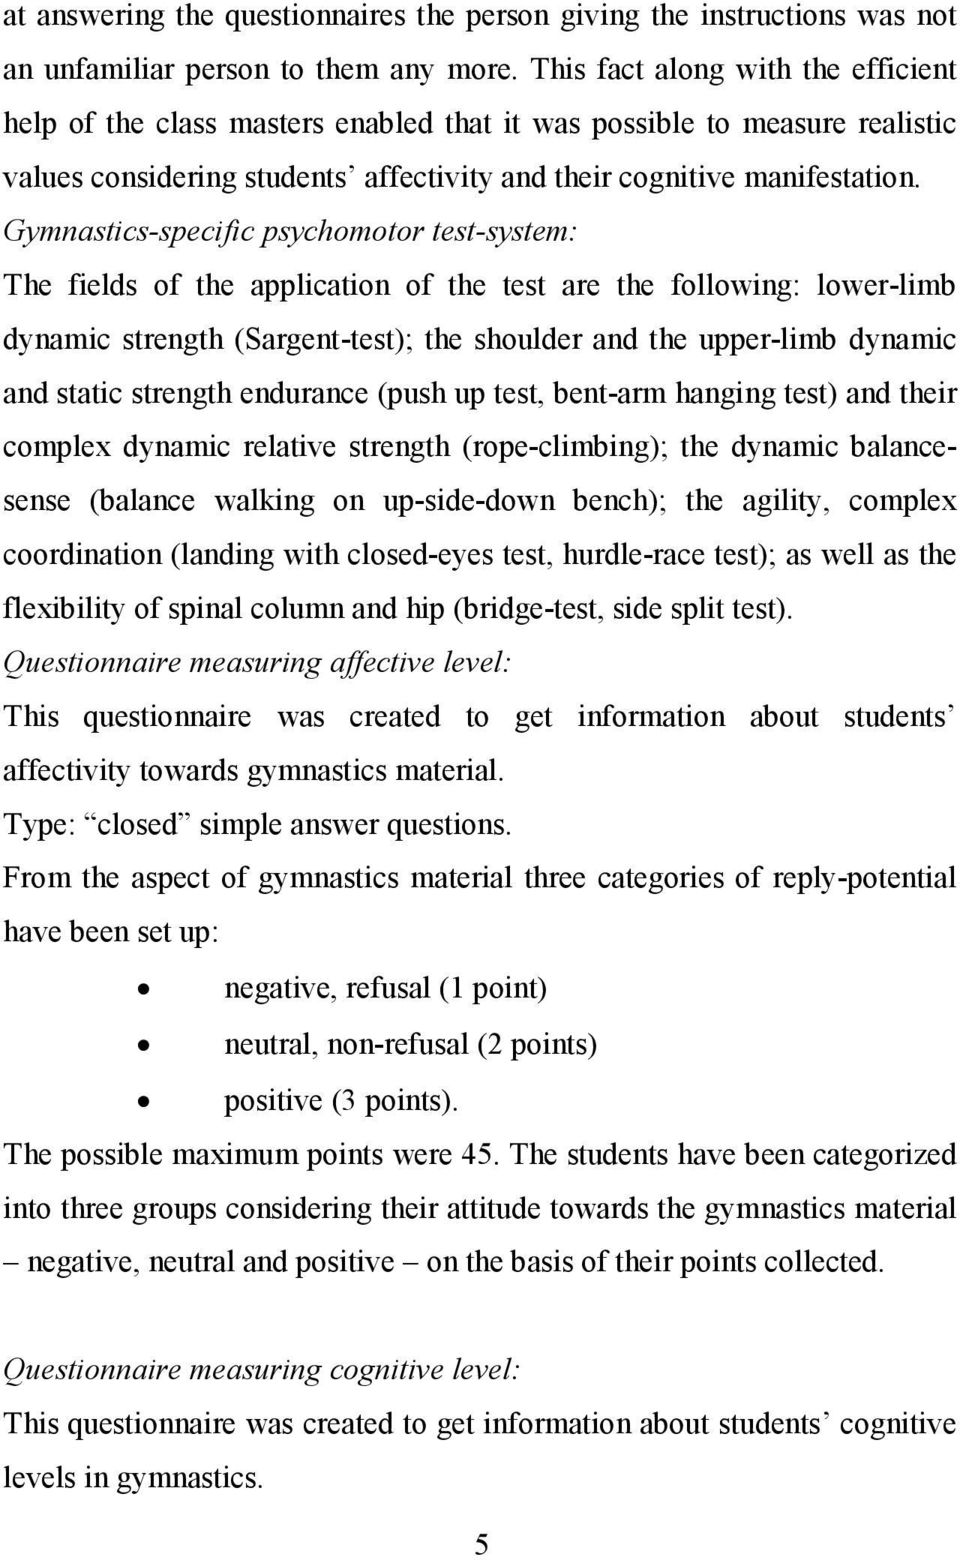 Gymnastics-specific psychomotor test-system: The fields of the application of the test are the following: lower-limb dynamic strength (Sargent-test); the shoulder and the upper-limb dynamic and